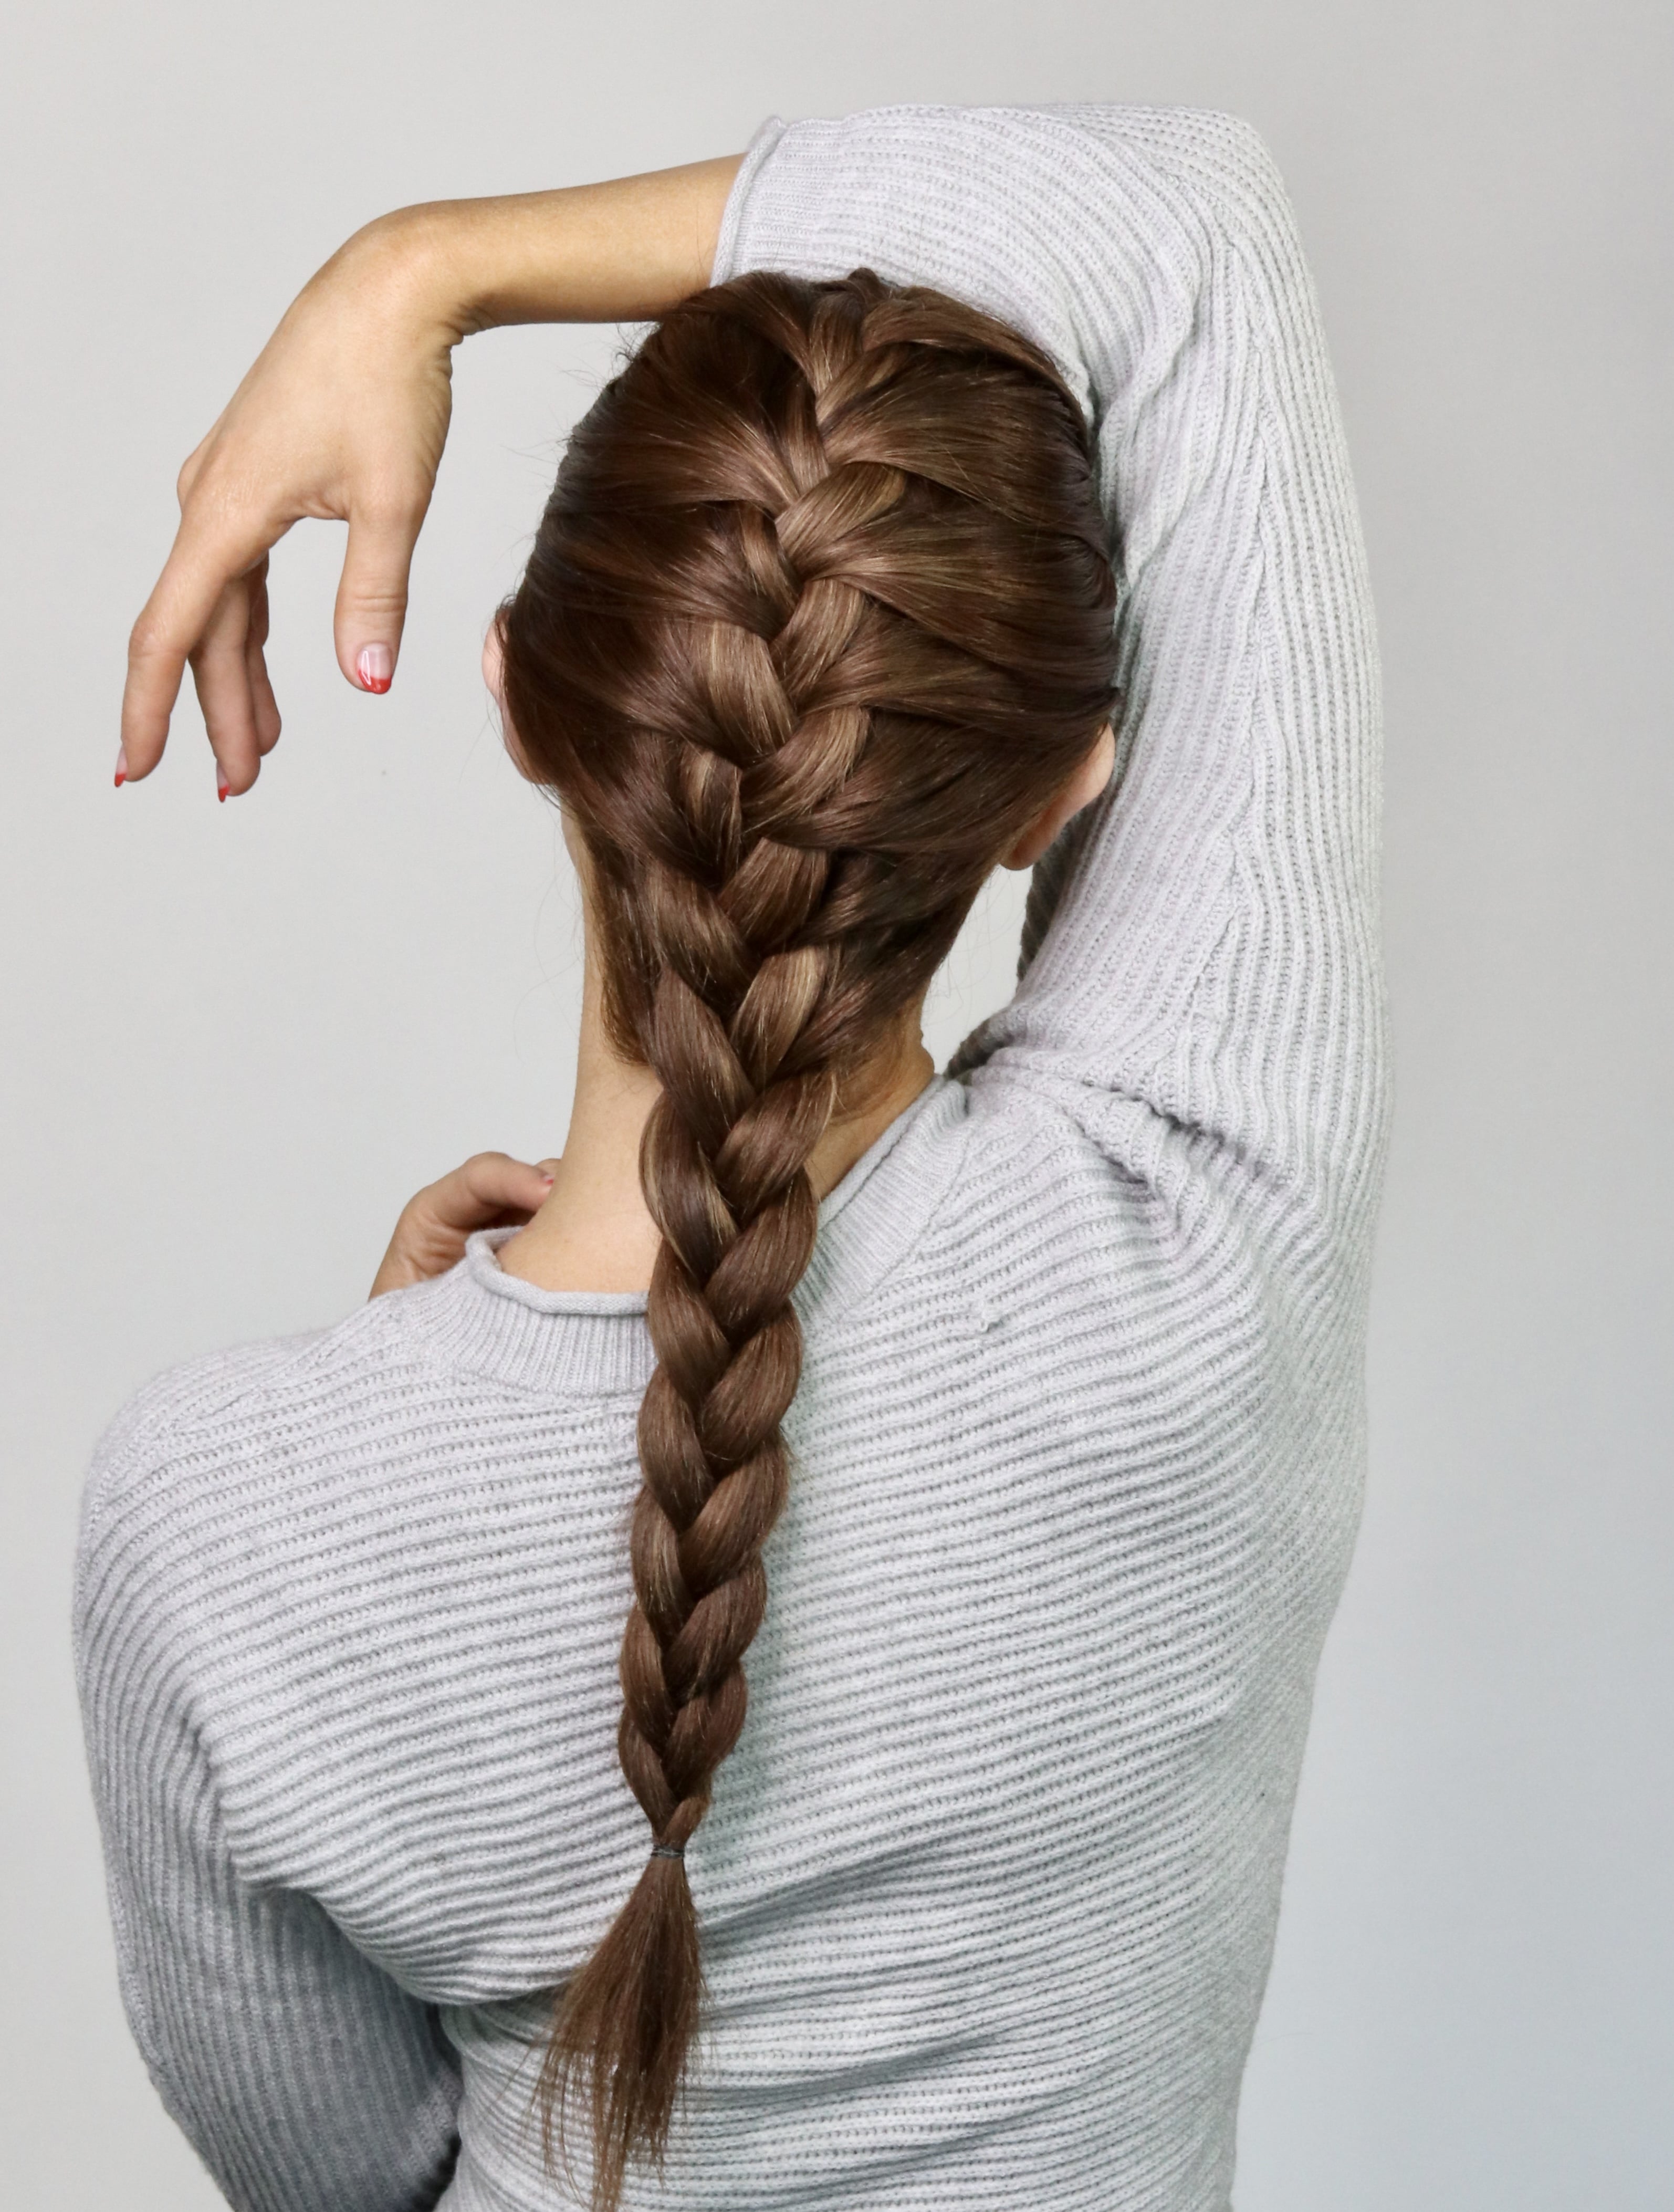 How To Draw A French Braid From The Front